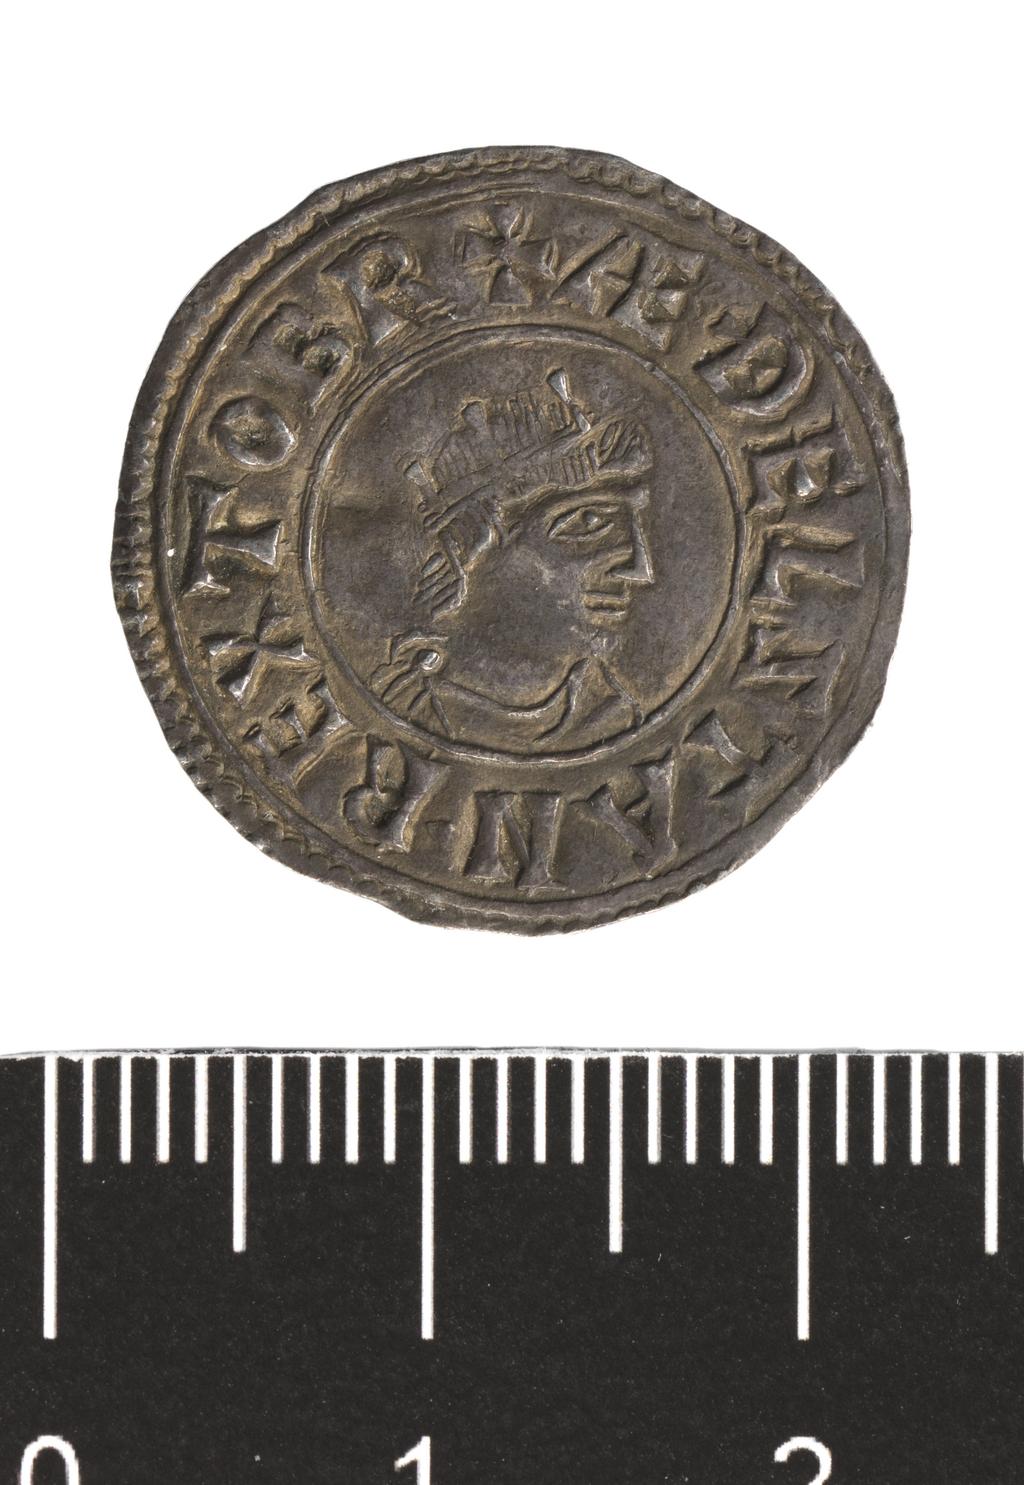 An image of Coinage. Penny, crowned bust type. Æthelstan (c.924/5-39), ruler. Otic, moneyer. Winchester mint. Obverse; +Ä5ELçTAN REX TO BR. Reverse; +OTI6 MONETA VVIÇI. Silver, struck, weight 1.57 g, diameter 21.7 mm, die axis 270° degrees, AD 924. Medieval. Anglo-Saxon.